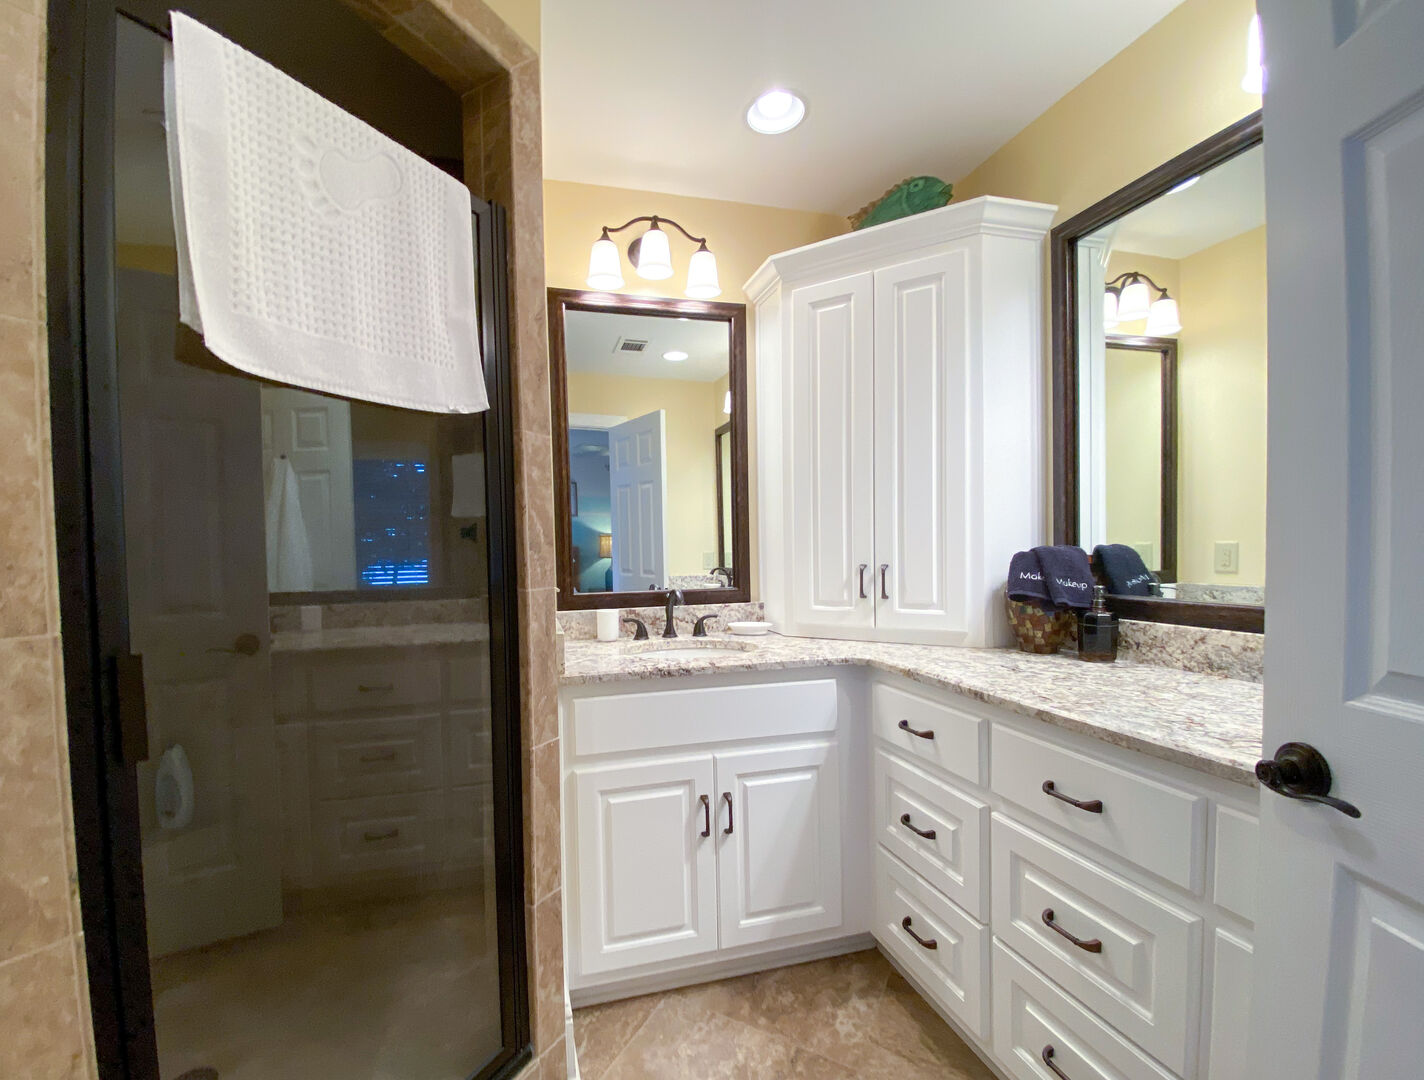 double vanity, walk in shower with seating and more gorgeous lake views